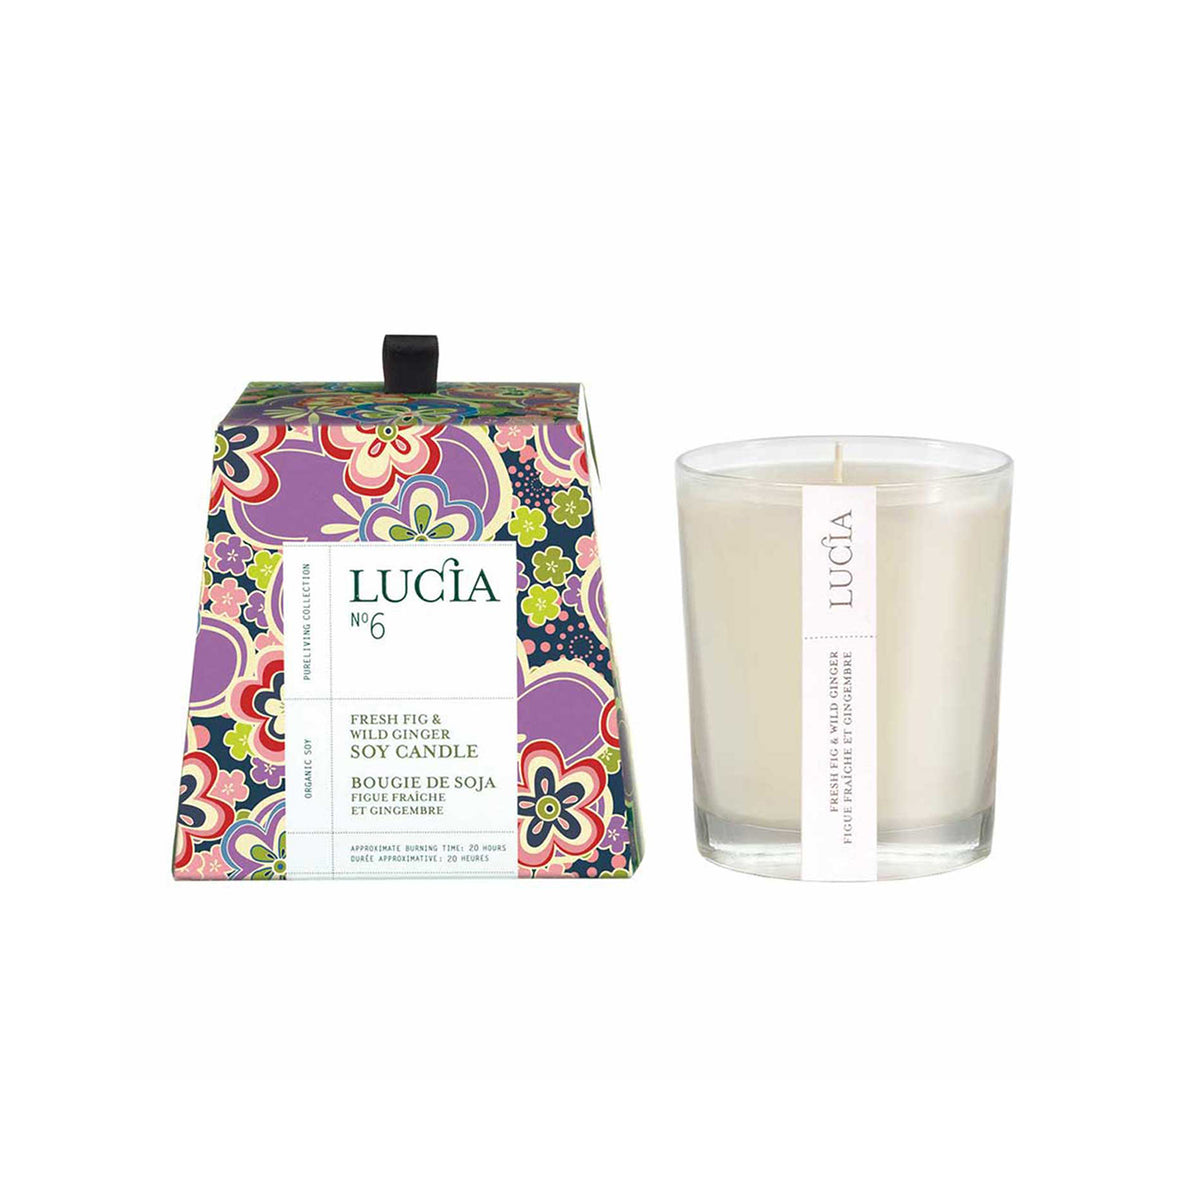 Lucia Home Collection, Beautifully Boxed Candles